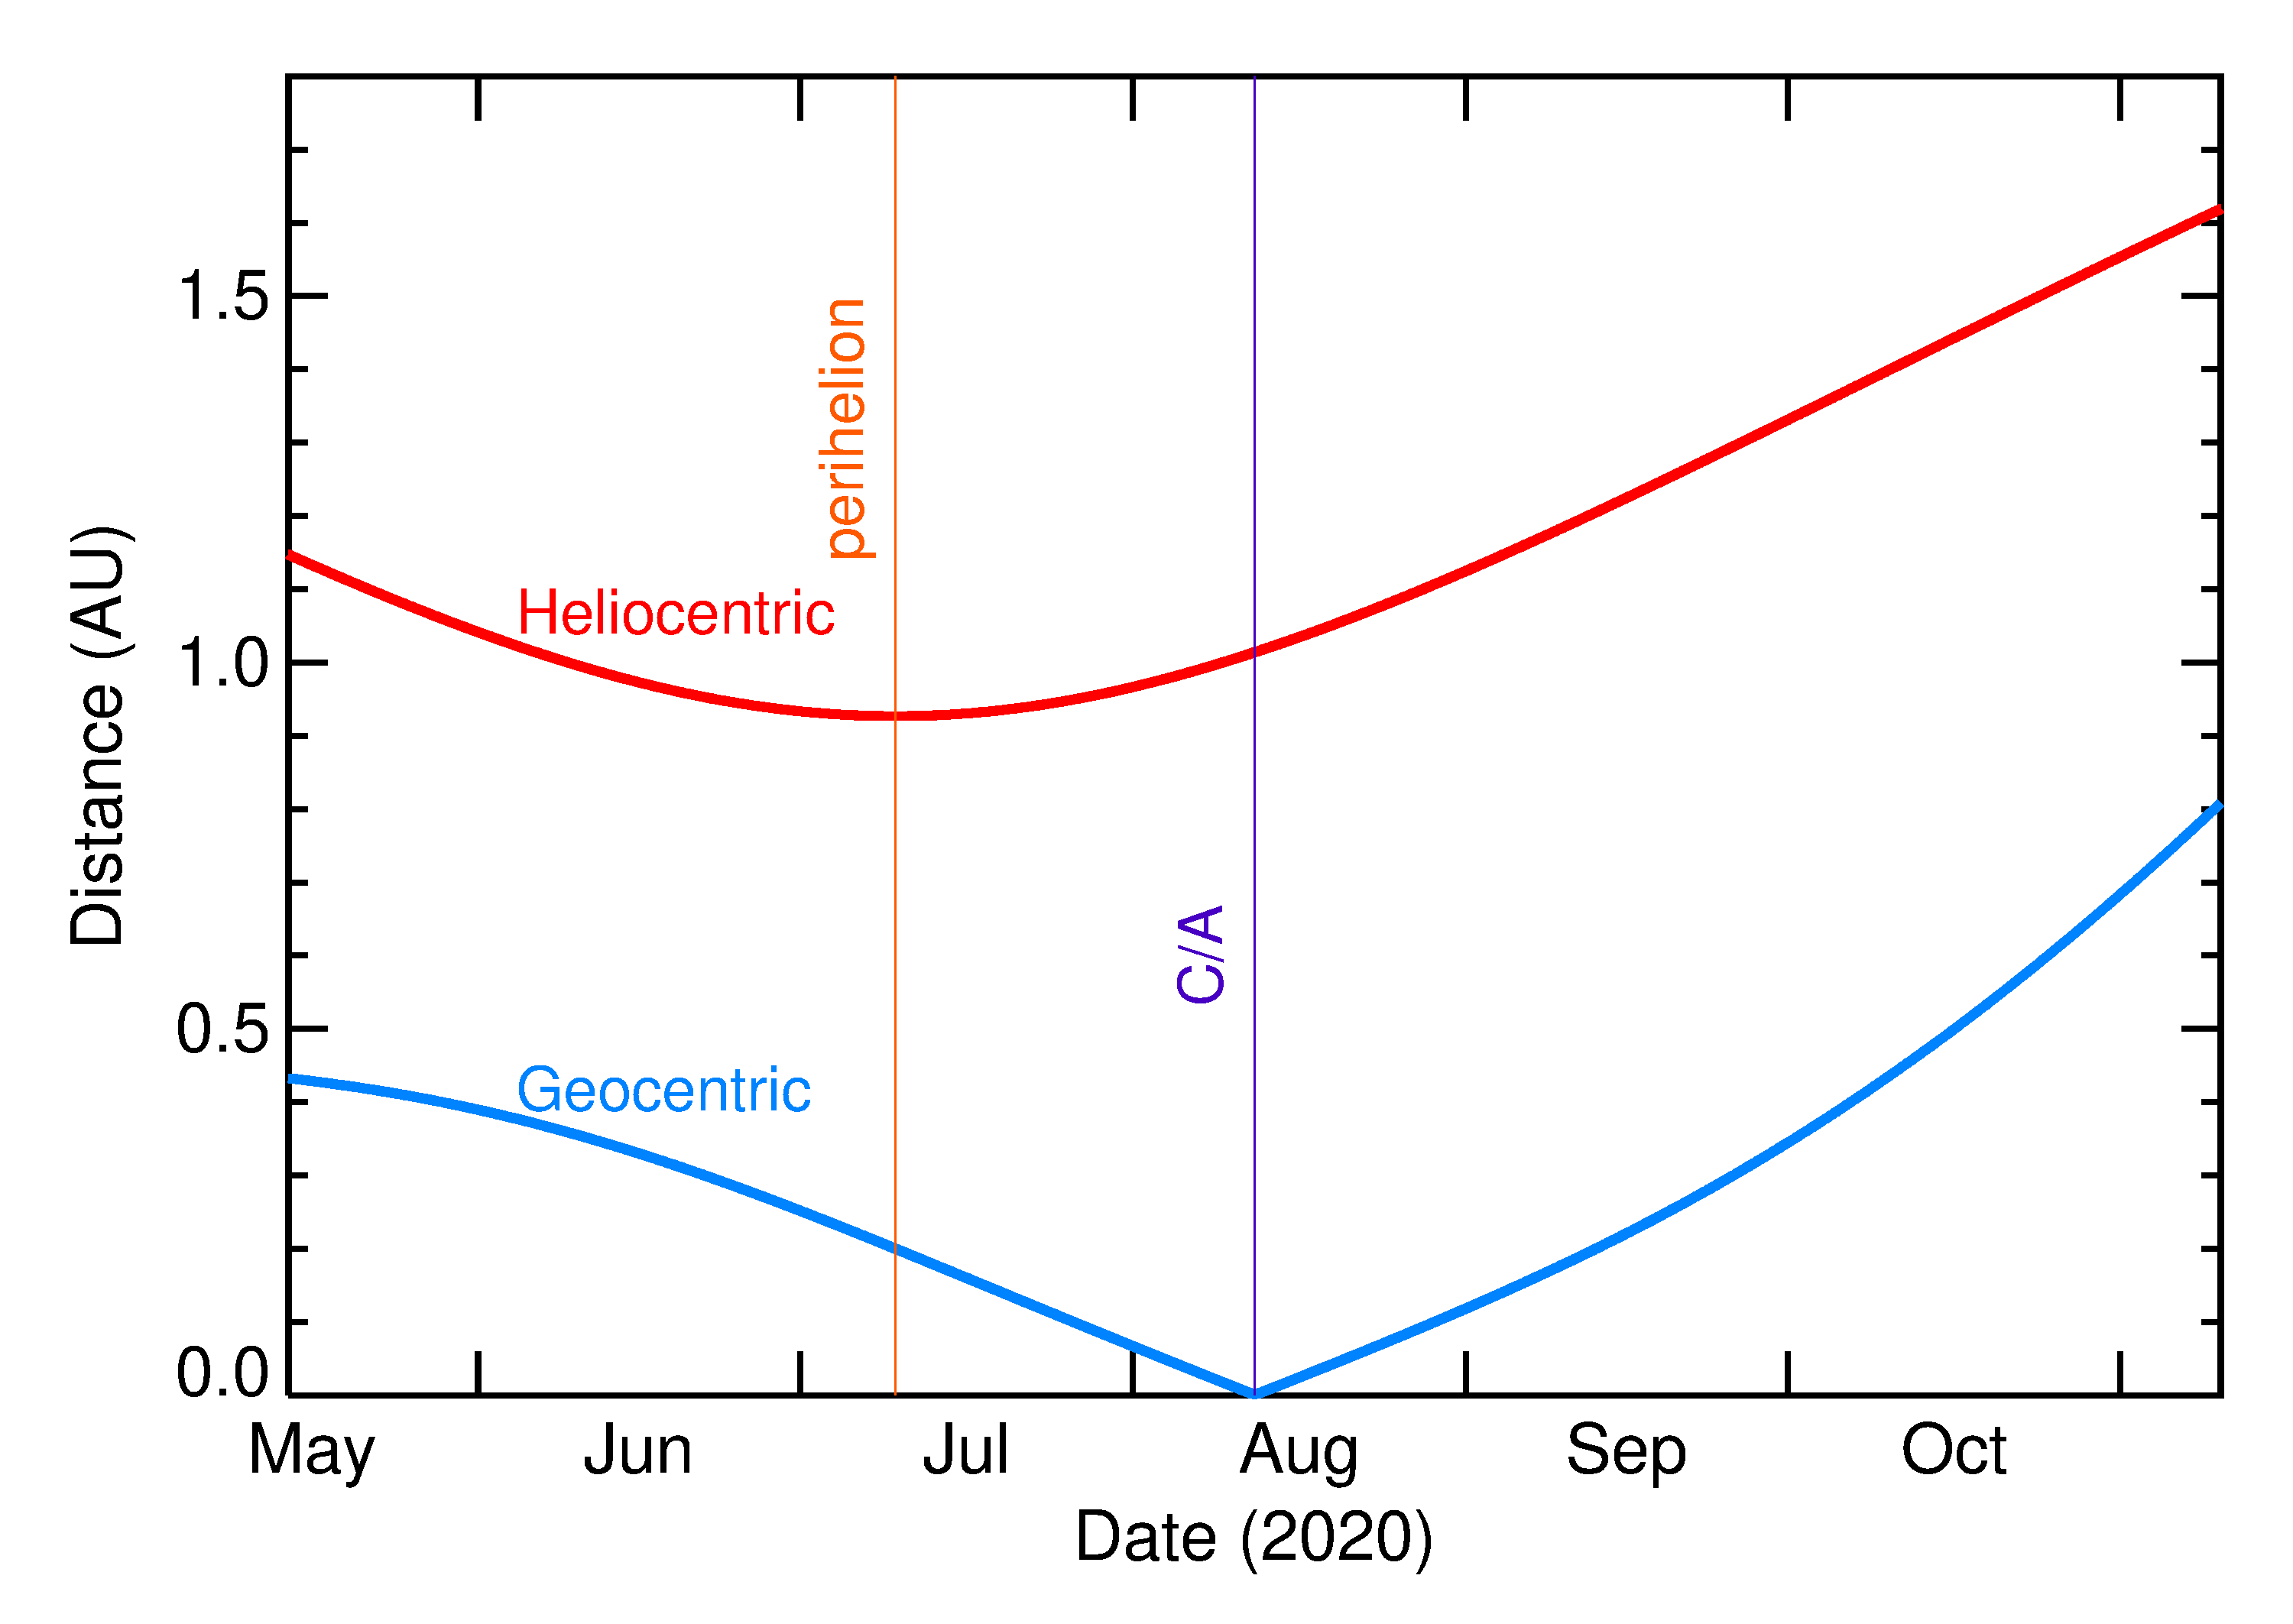 Heliocentric and Geocentric Distances of 2020 PX5 in the months around closest approach